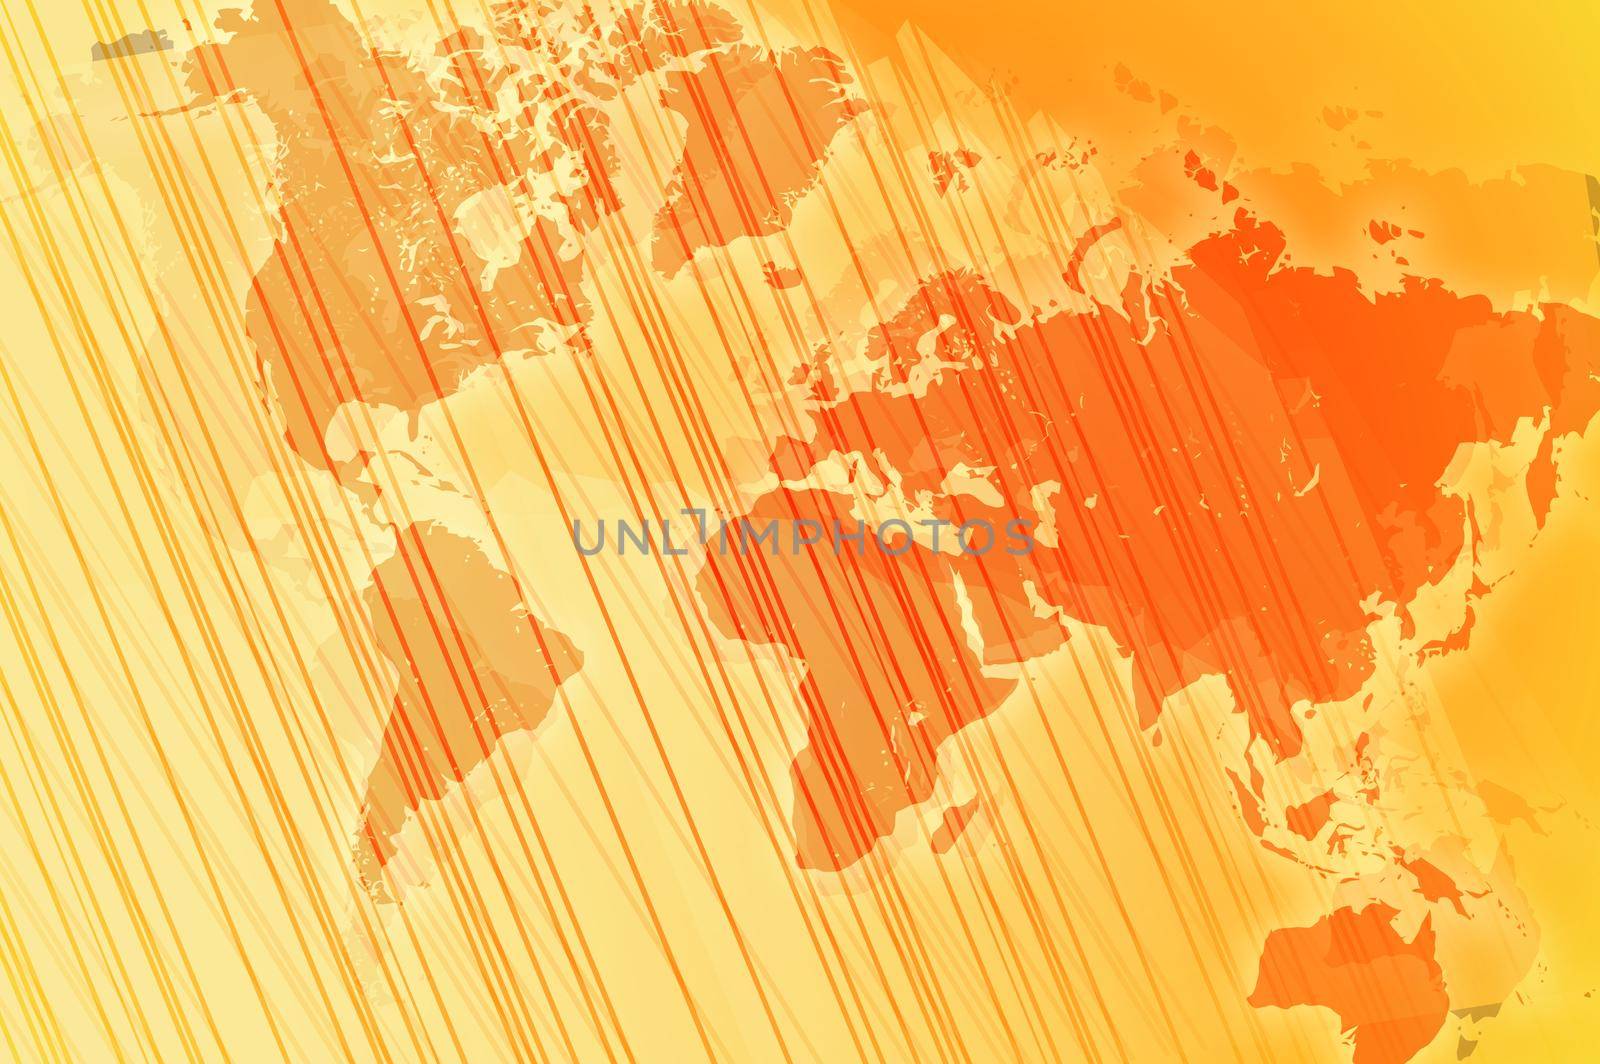 Orange - Yellow Business Background Design with World Map and Stripes. by welcomia